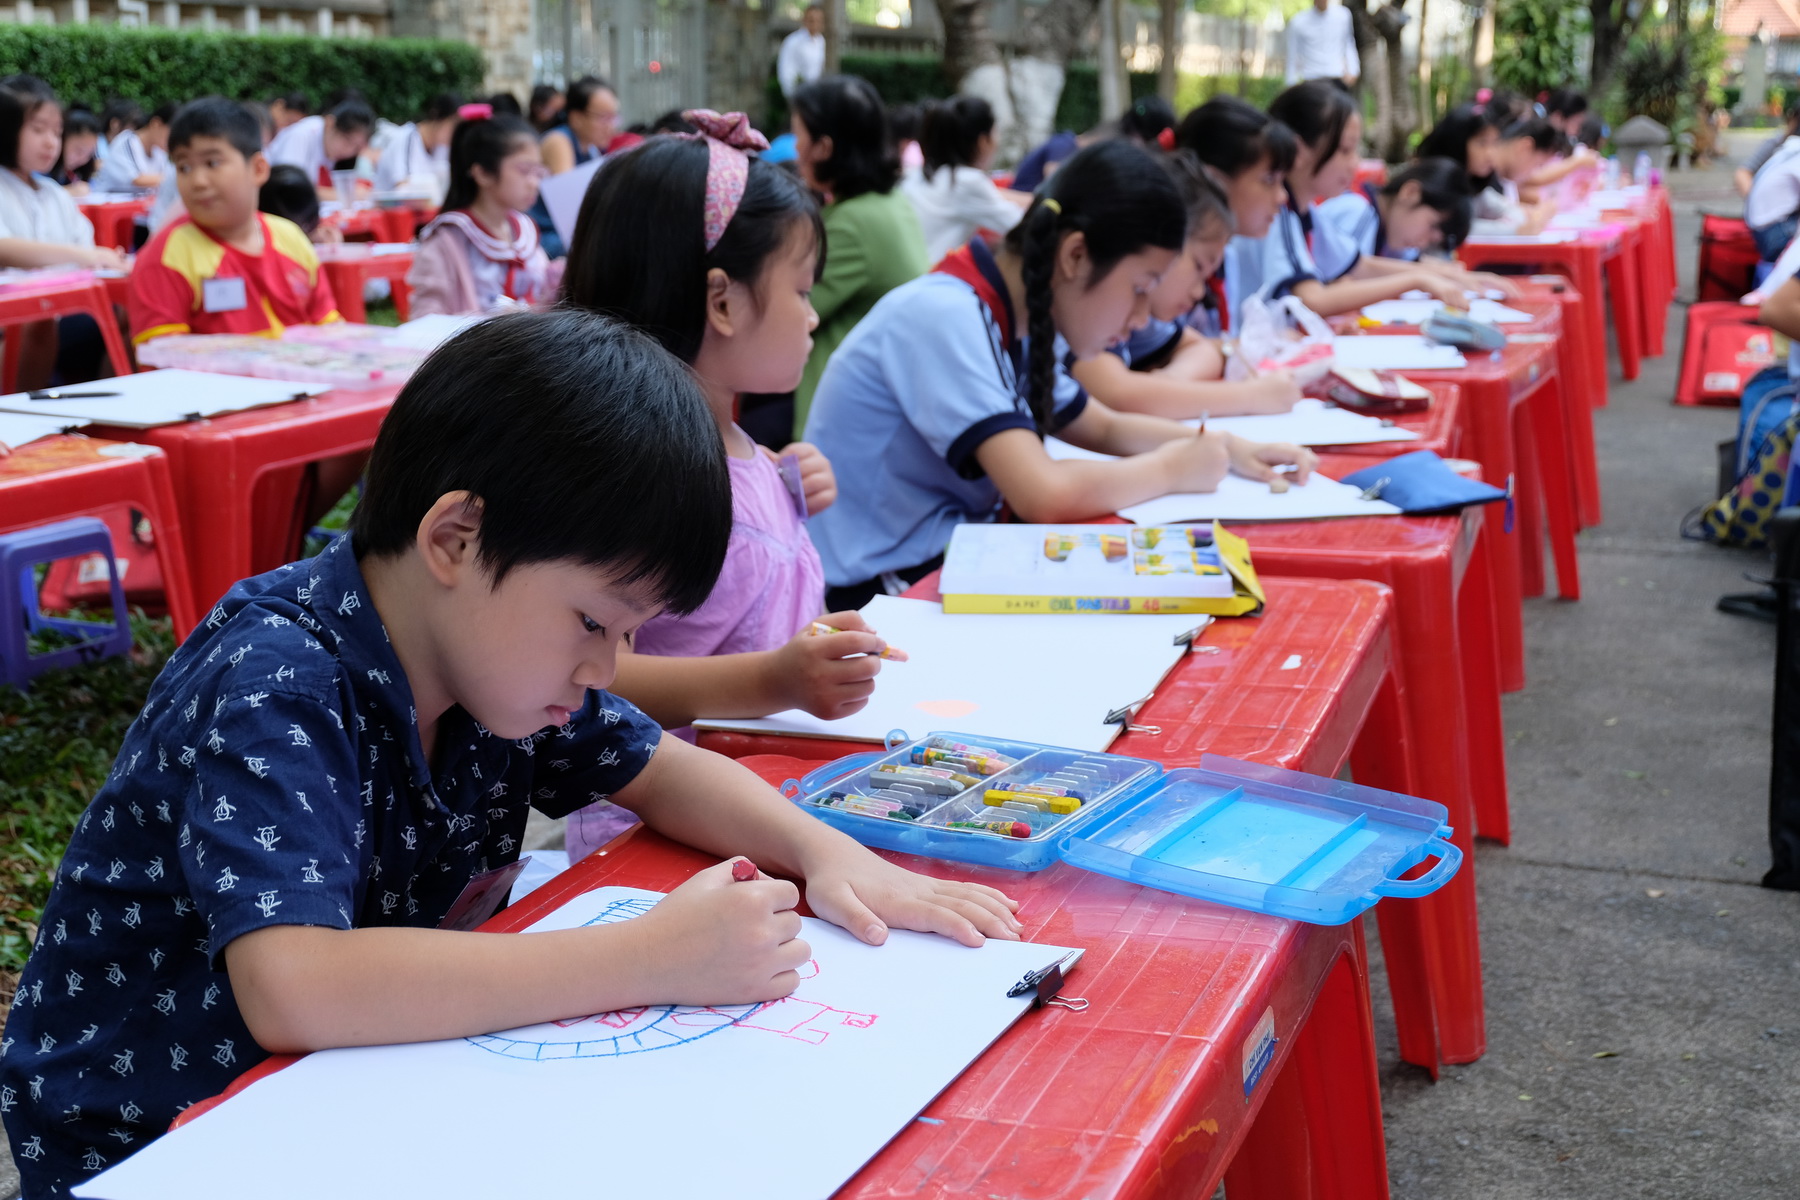 Children participate in the art competition to celebrate the 45th anniversary of the diplomatic relations between Vietnam and Singapore in Ho Chi Minh City on January 8, 2018. Photo: Tran Phuong/Tuoi Tre News